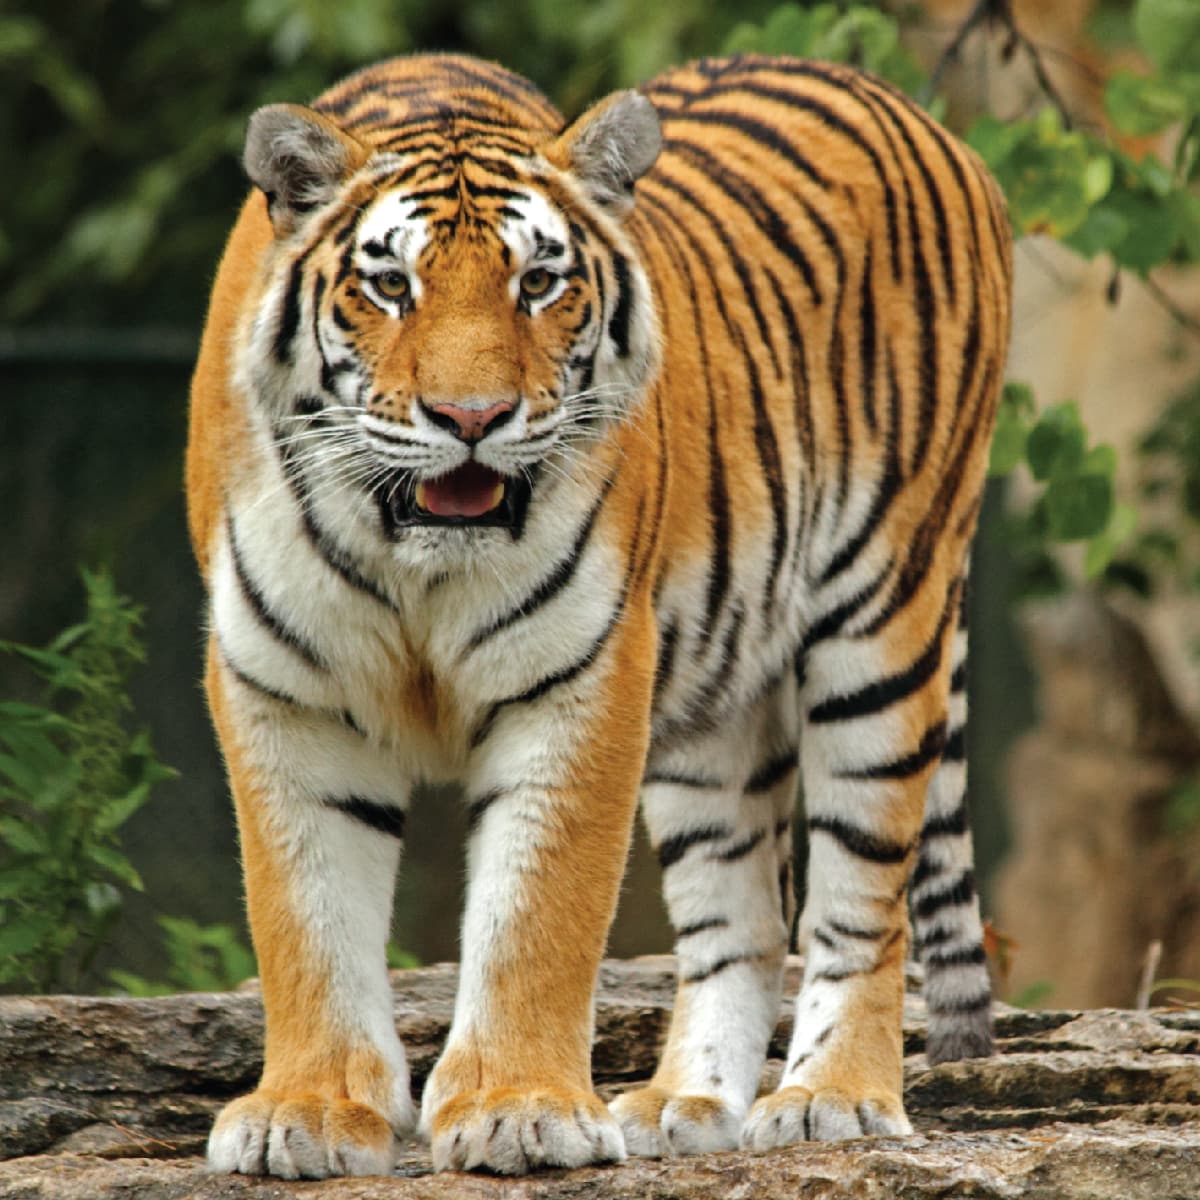 The larest number of tigers is in the US, with more than 5000. And in all of Asia and Russia, they make 4000. There are only 350 tigers in US zoos and rest of them are kept in homes